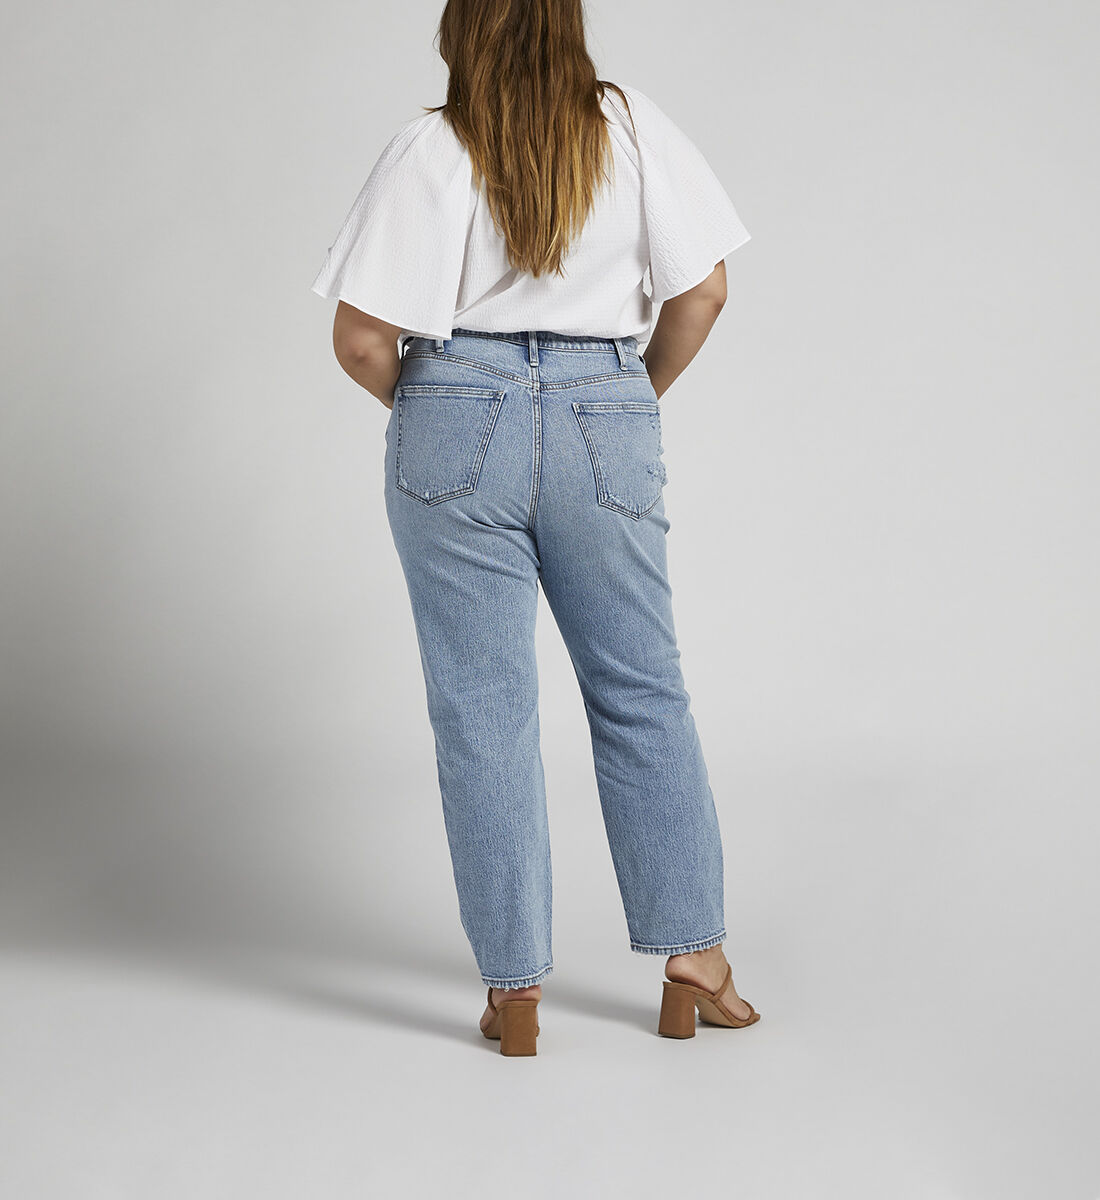 Buy Highly Desirable High Rise Slim Straight Leg Jeans Plus Size 